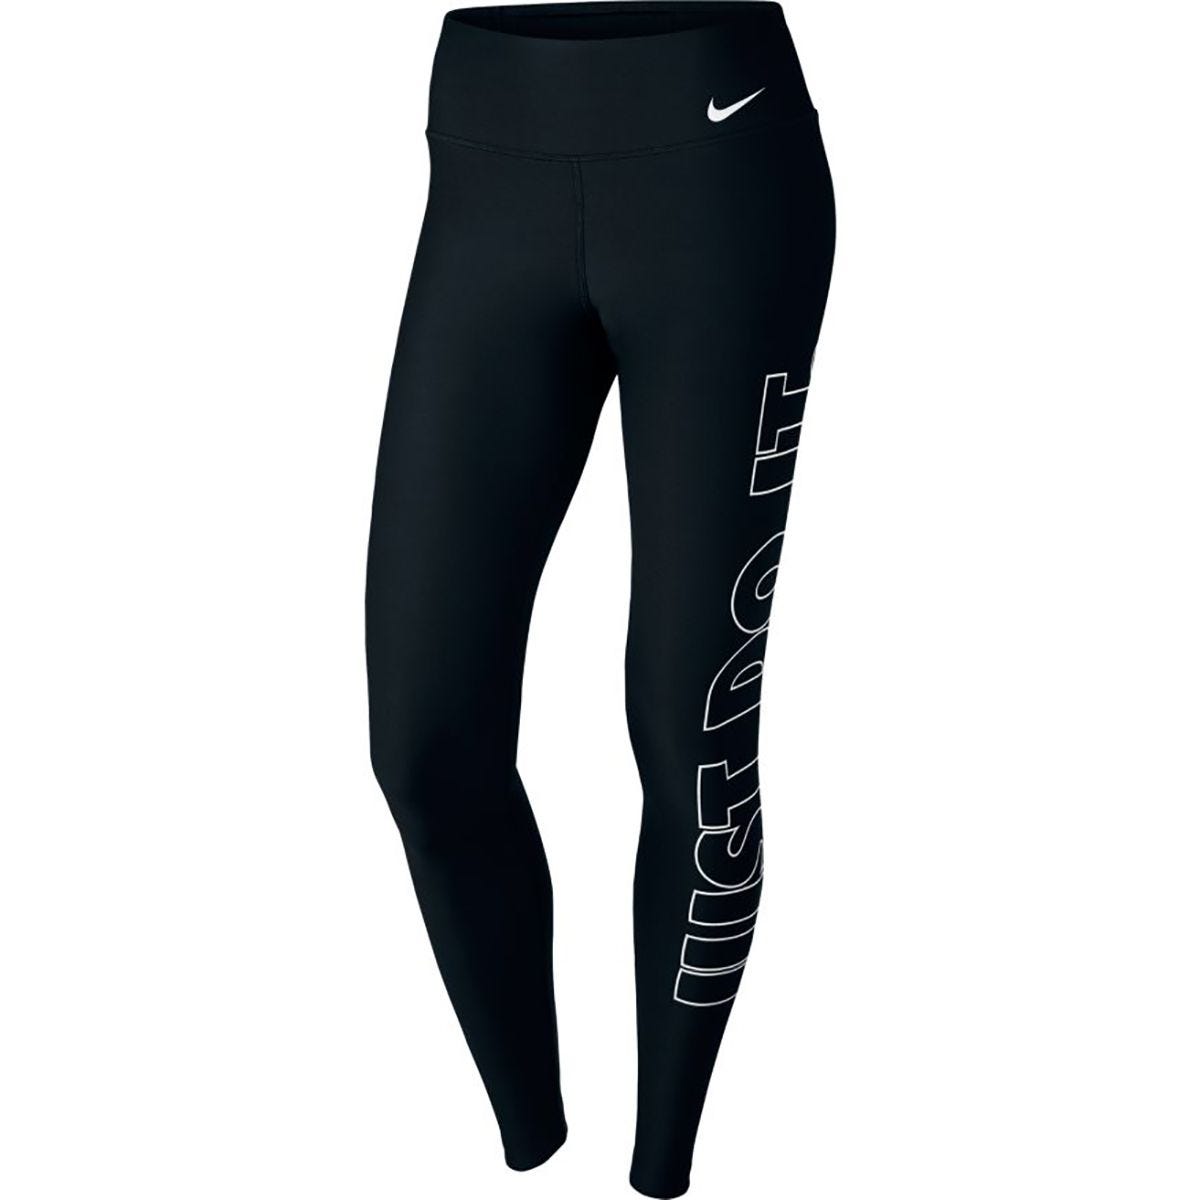 Nike 'Just Do It' Power Training Women's Tights